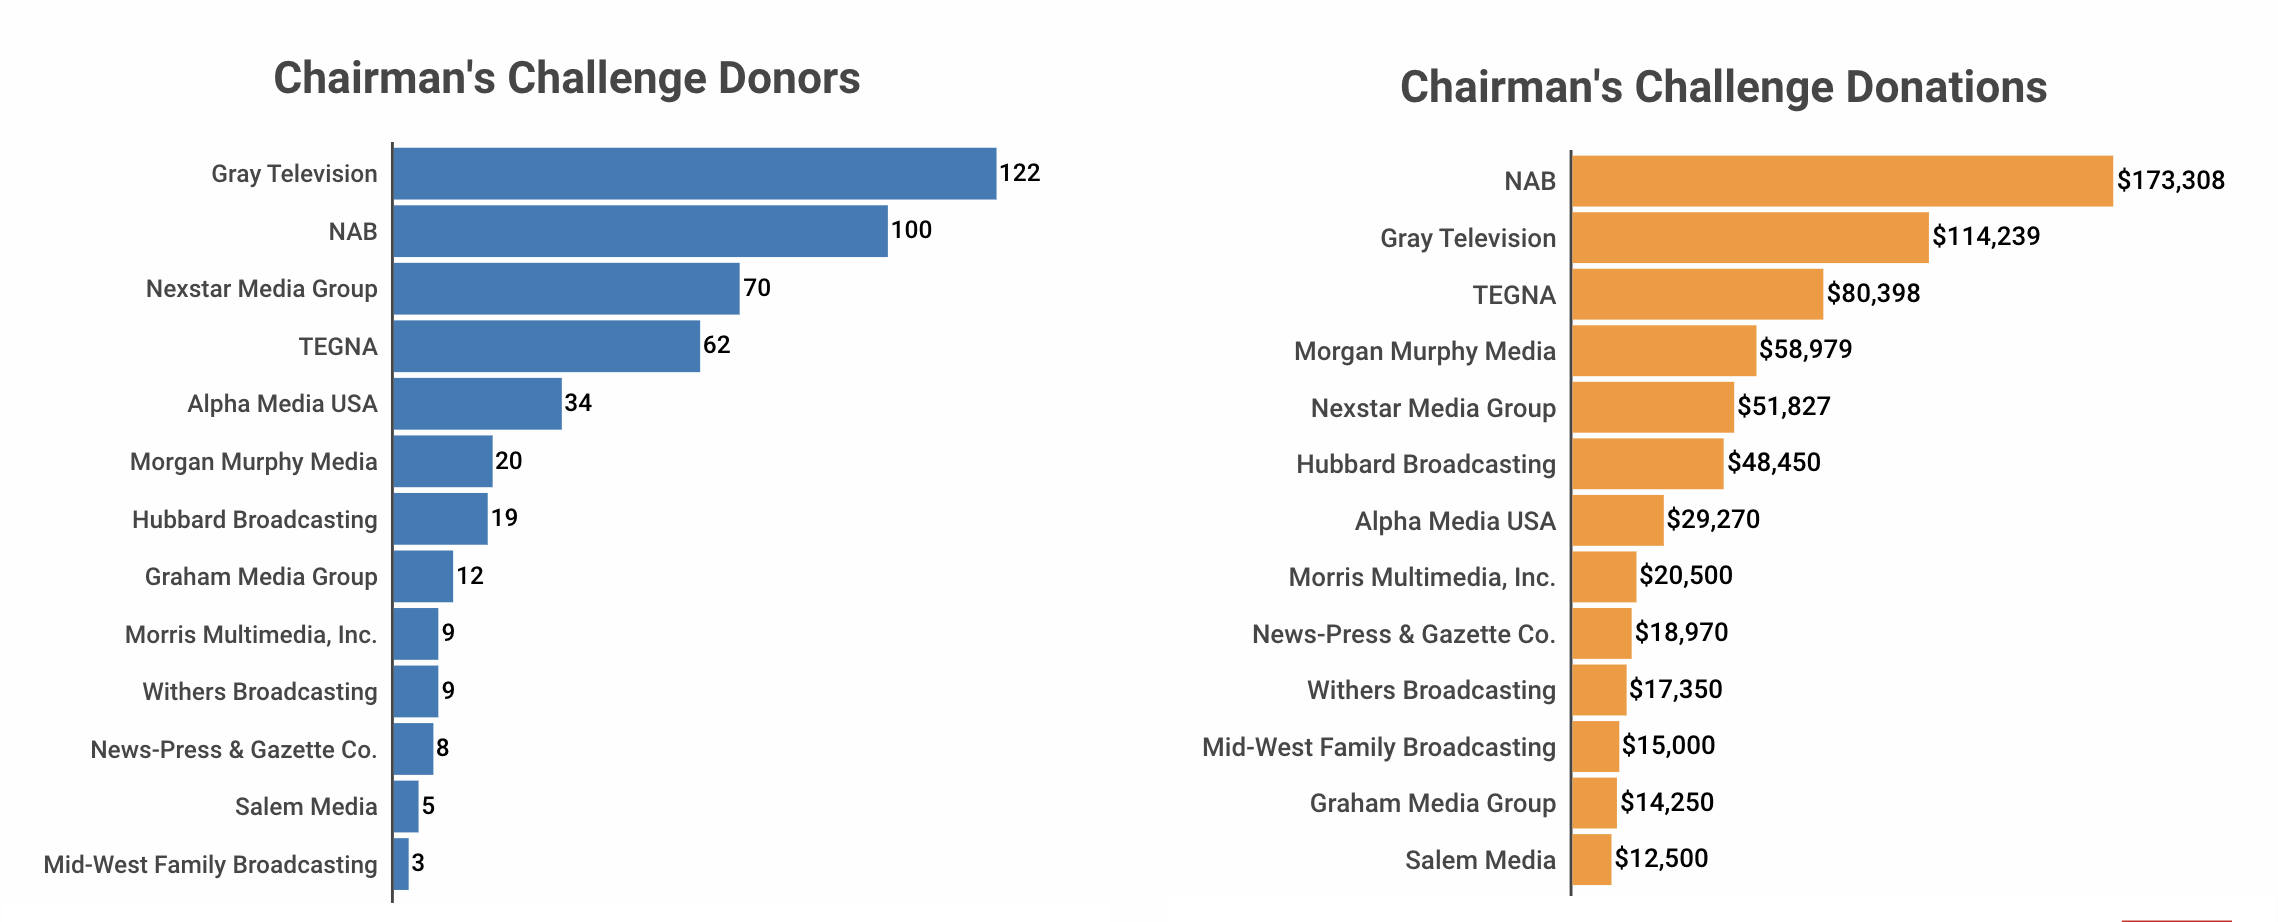 Chairman's Challenge Donors and Donations